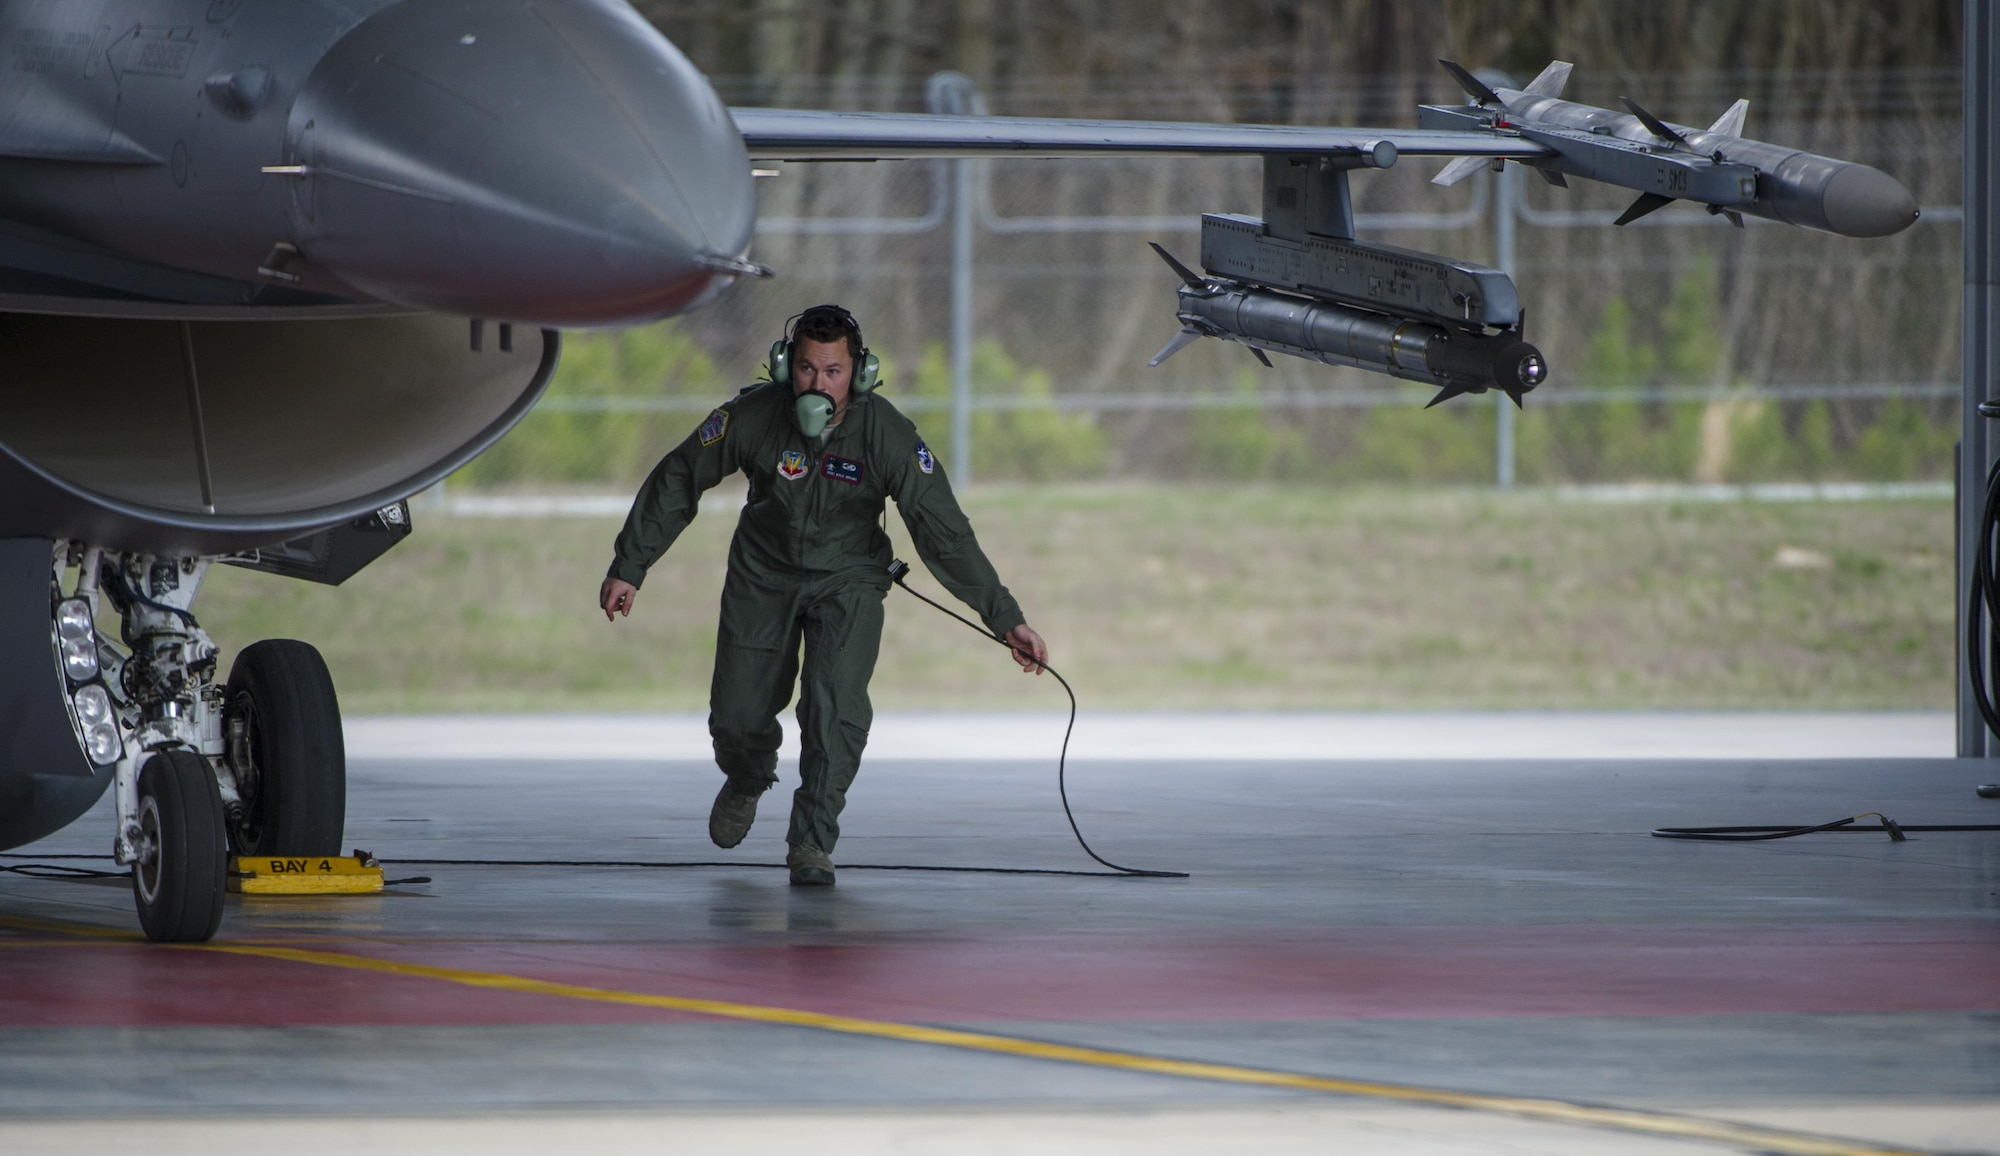 Staff Sgt. Kyle Adams, 113th Aerospace Control Alert crew chief, performs a pre-flight inspection on an F-16 Fighting Falcon during an alert scramble at Joint Base Andrews, Md., March 28, 2017. An alert scramble is a rapid response to any air defense operation and air emergency. The 113th ACA facility has more than double the number of alert events than all other active duty and National Guard bases combined. (U.S. Air Force photo by Airman 1st Class Gabrielle Spalding)